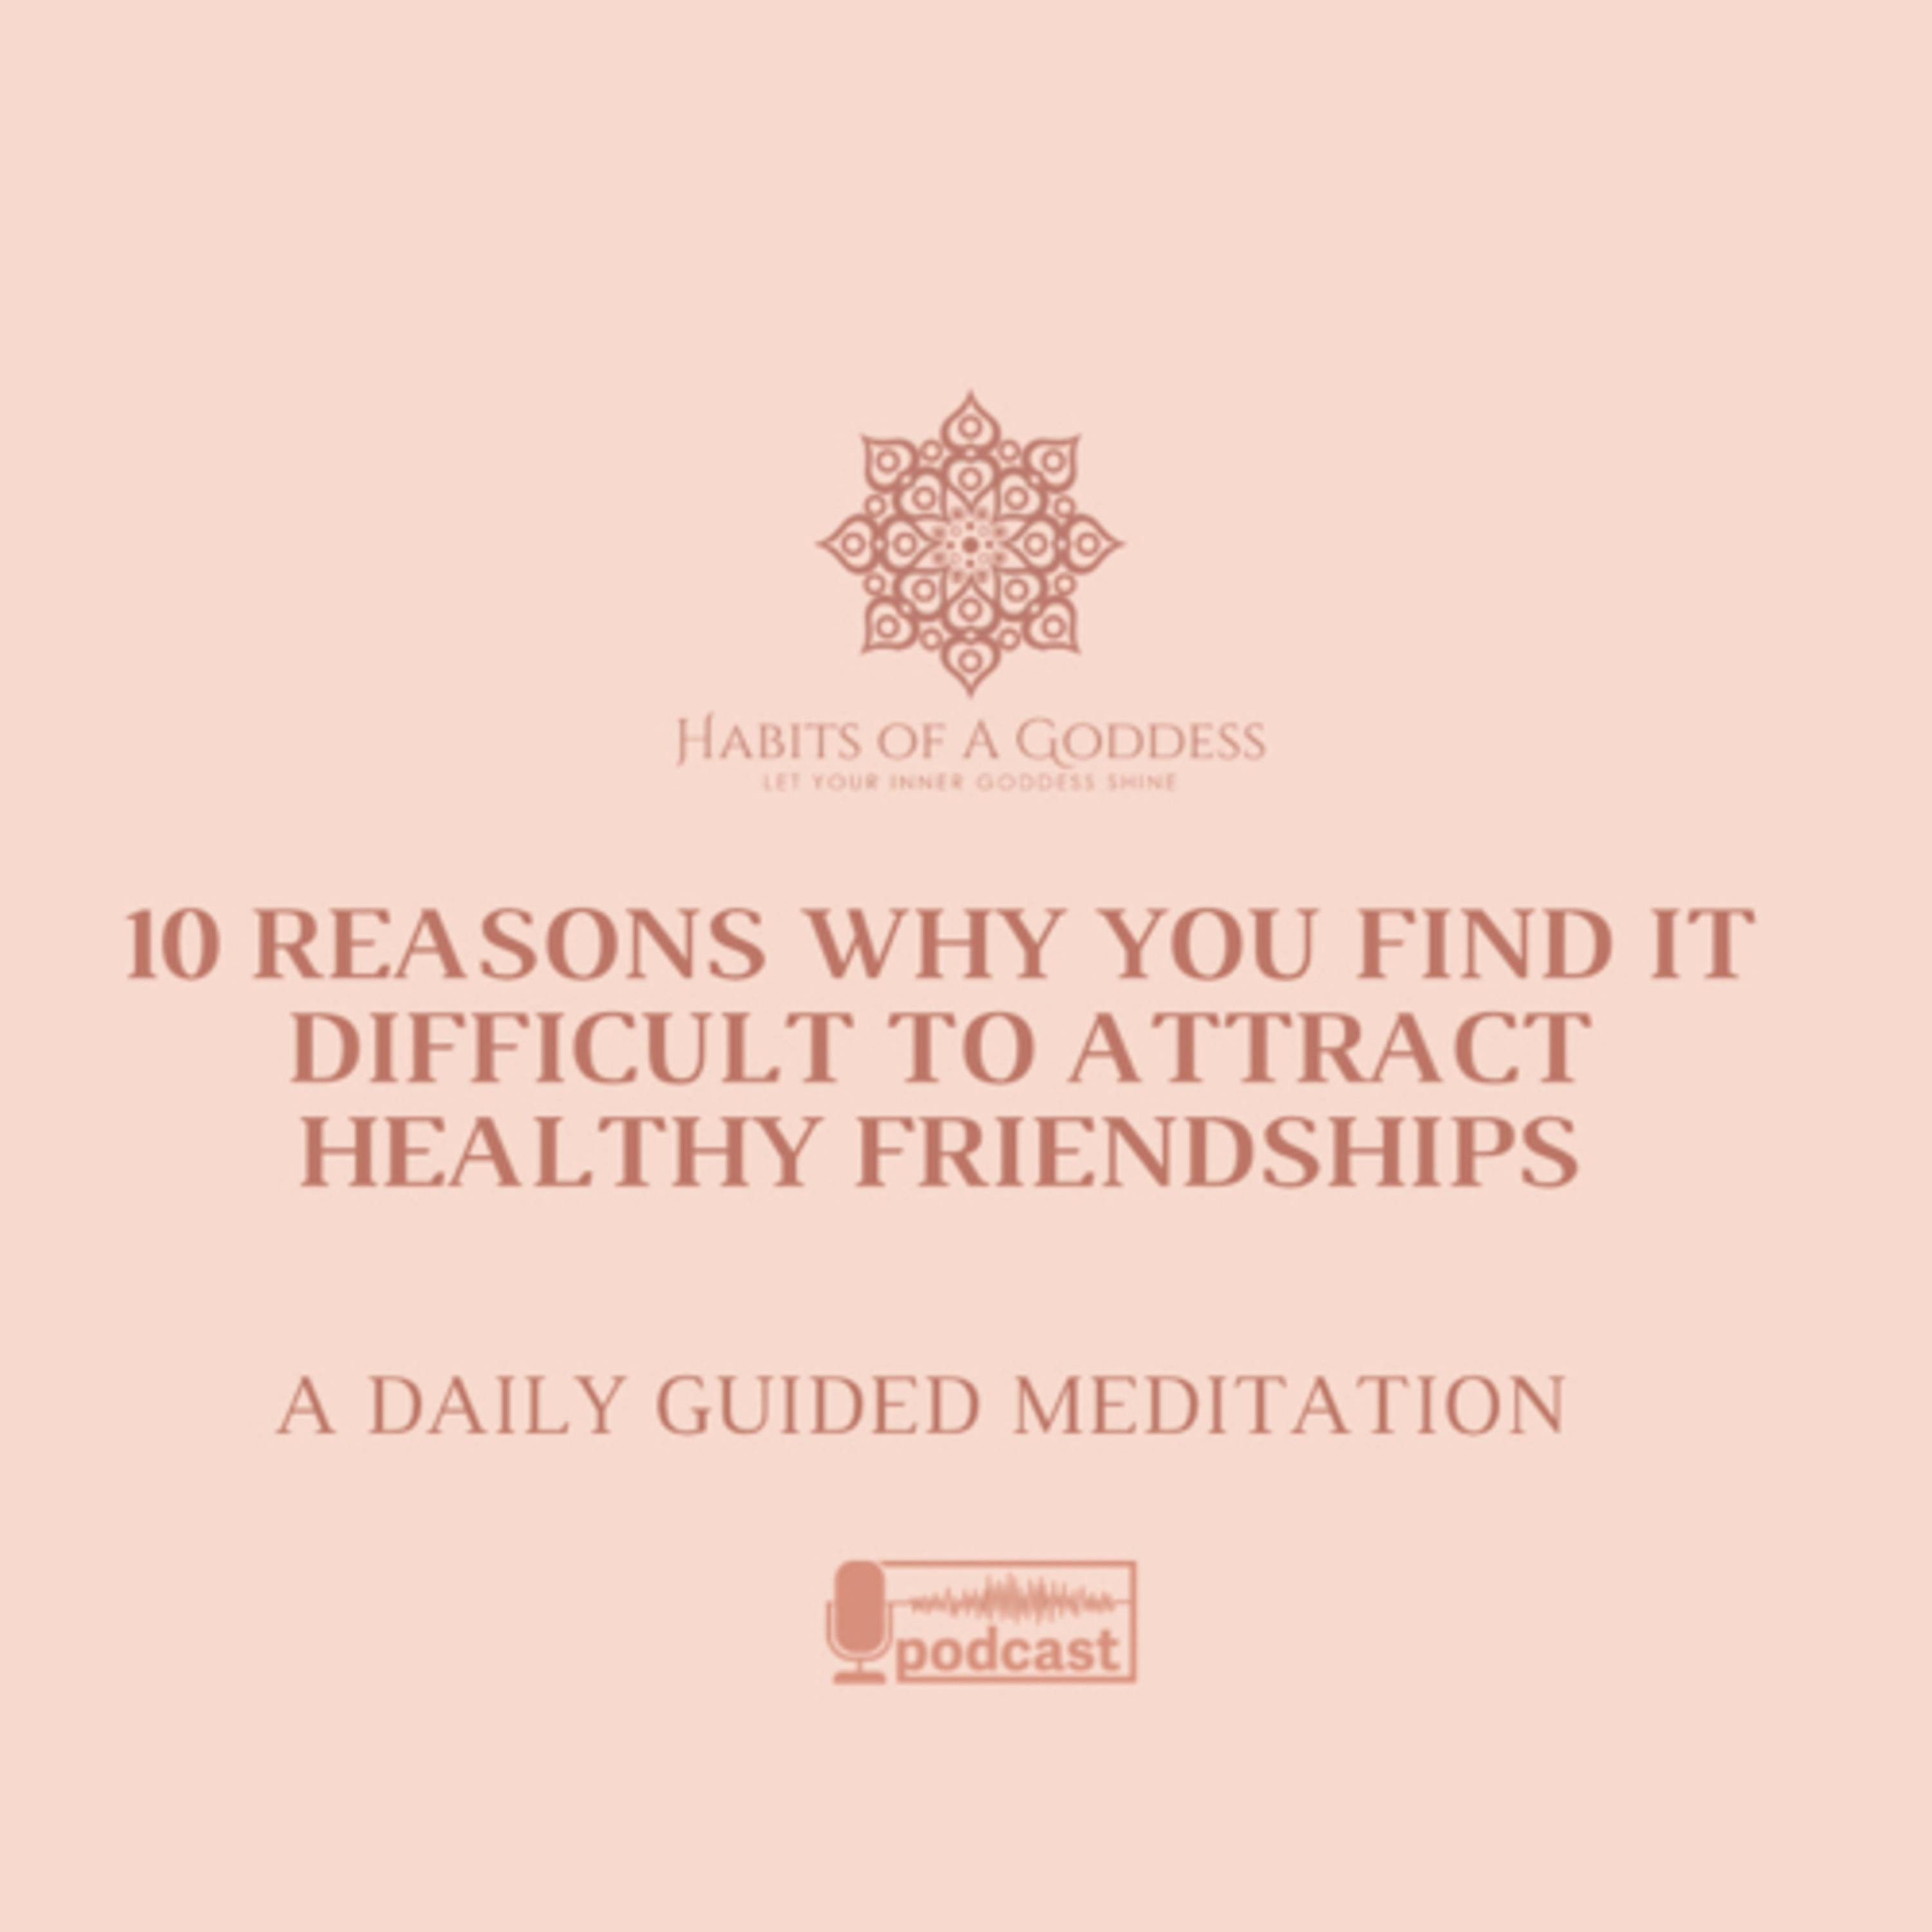 10 REASONS WHY YOU FIND IT DIFFICULT TO ATTRACT HEALTHY FRIENDSHIPS | HABITS OF A GODDESS